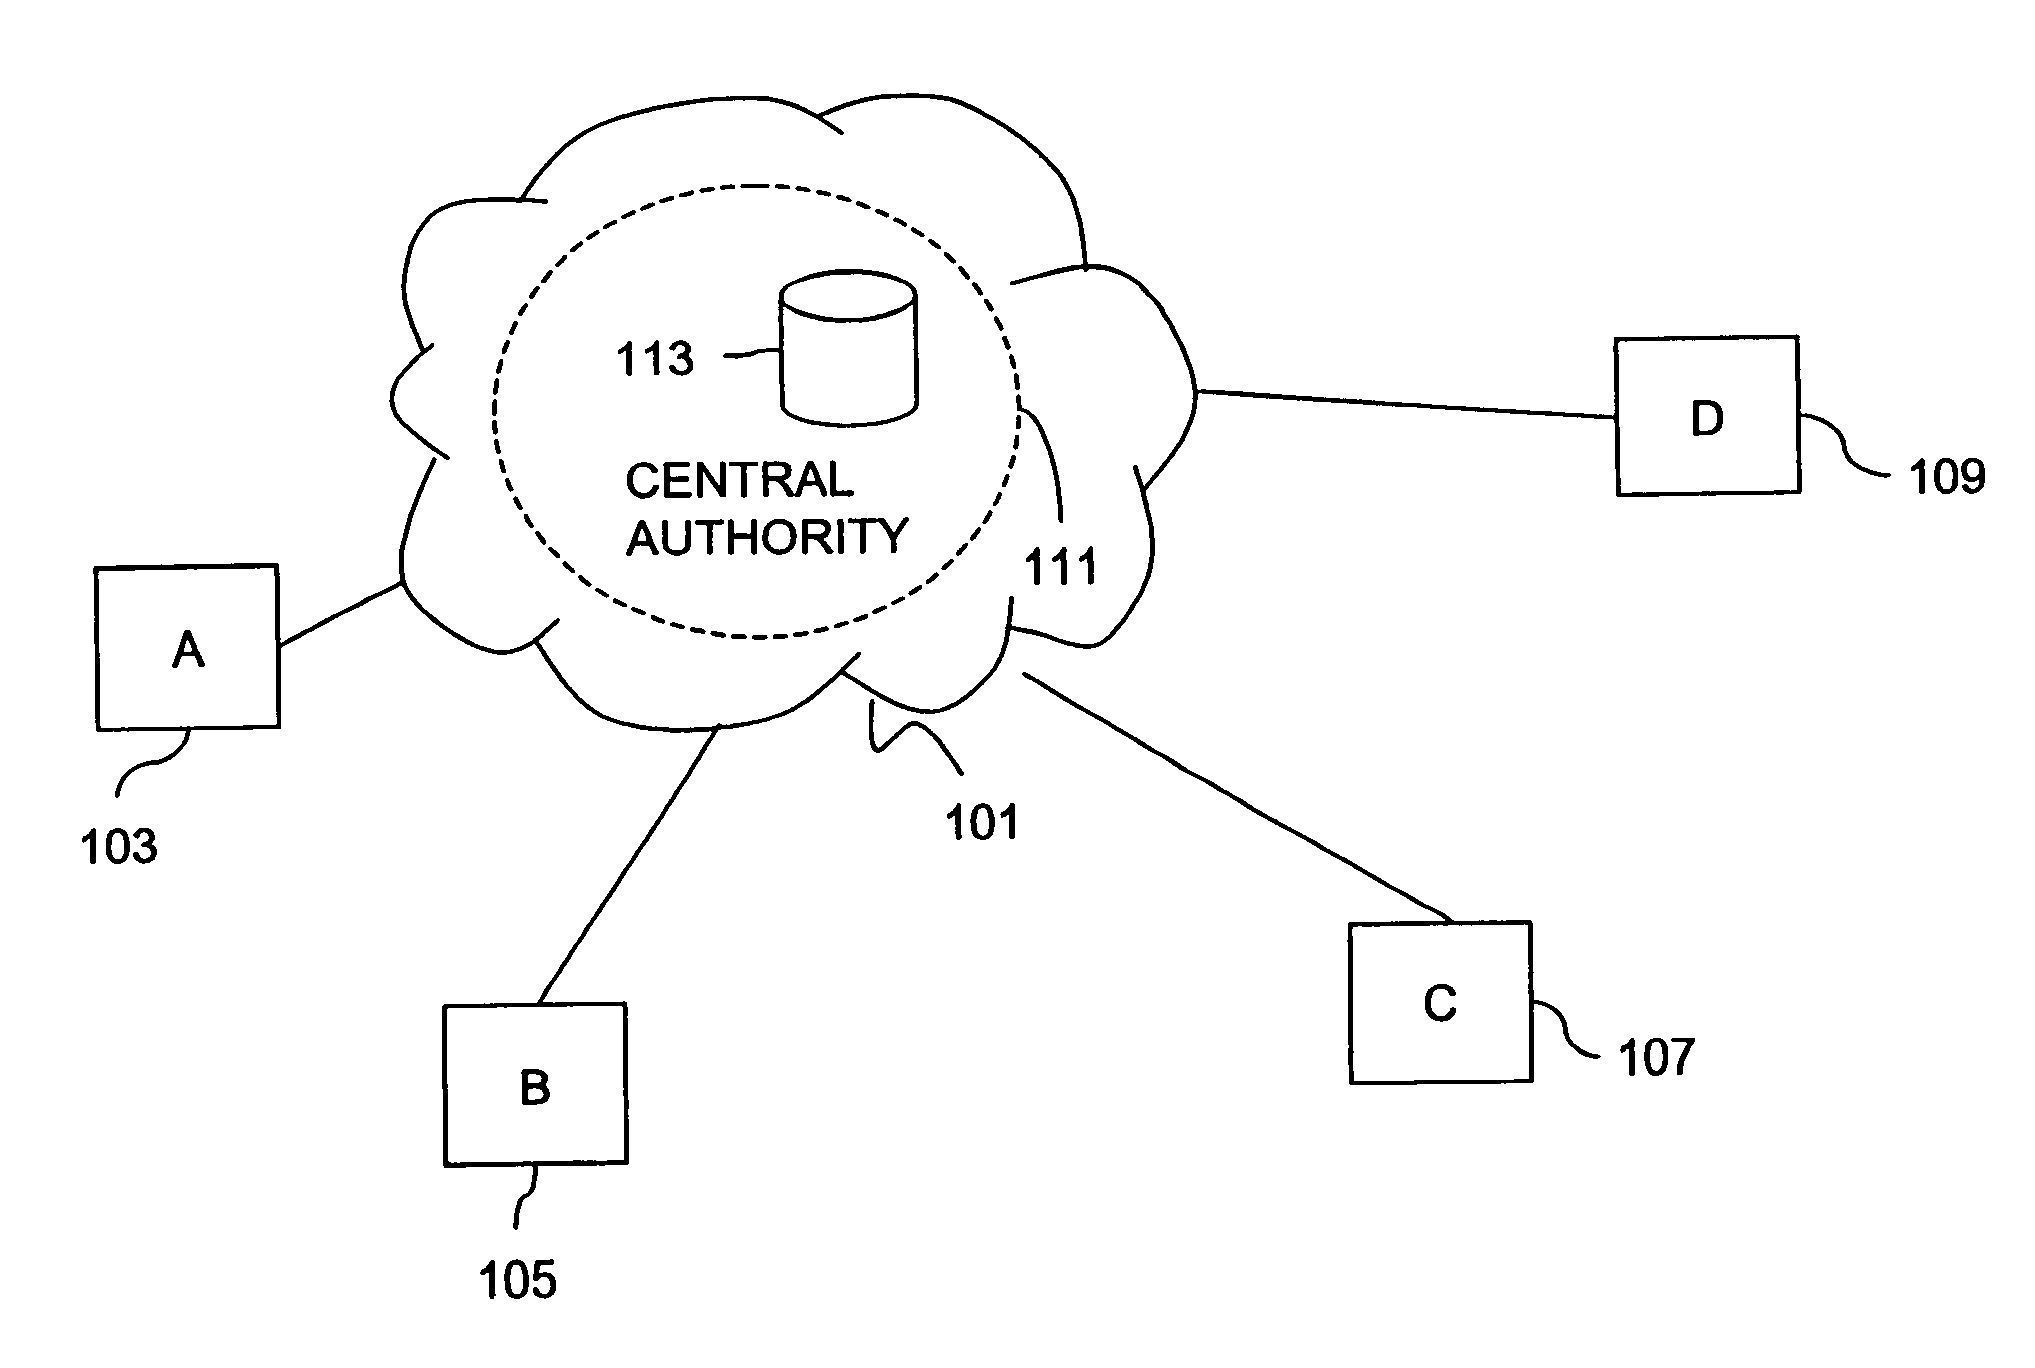 Method and apparatus for creating a secure communication channel among multiple event service nodes